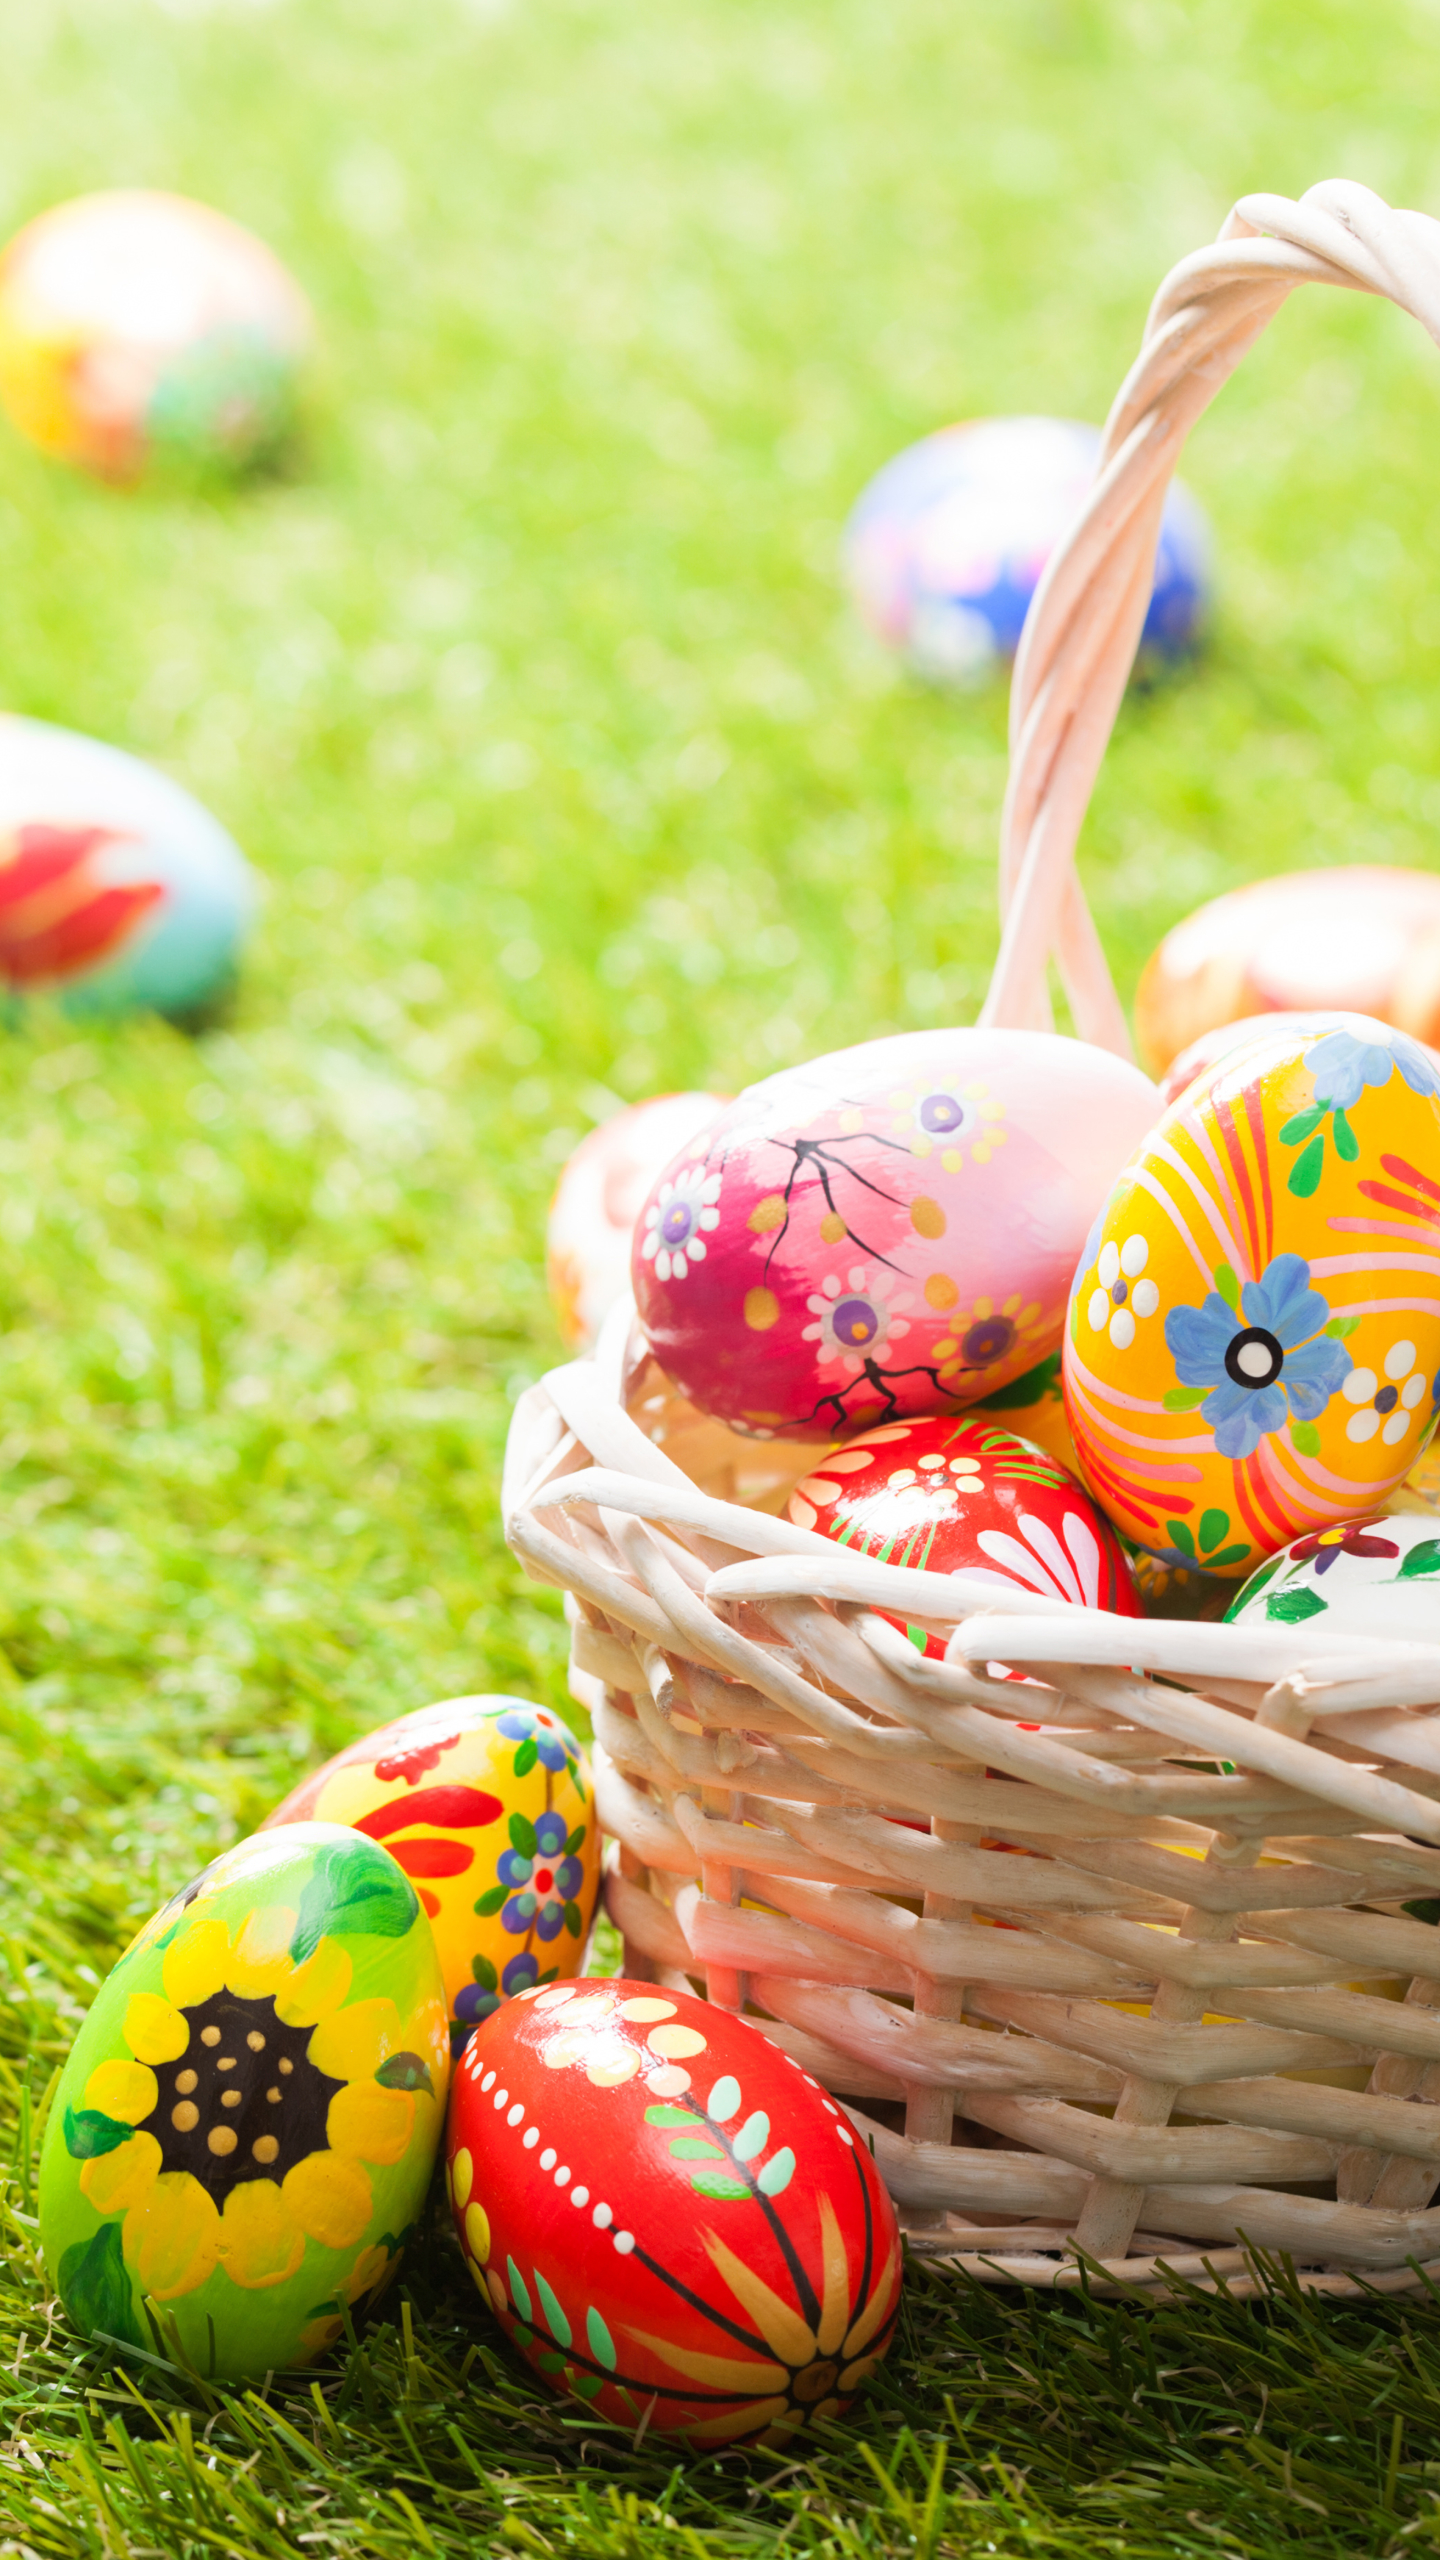 Free Easter Wallpapers for Android  iPhones  Download Now